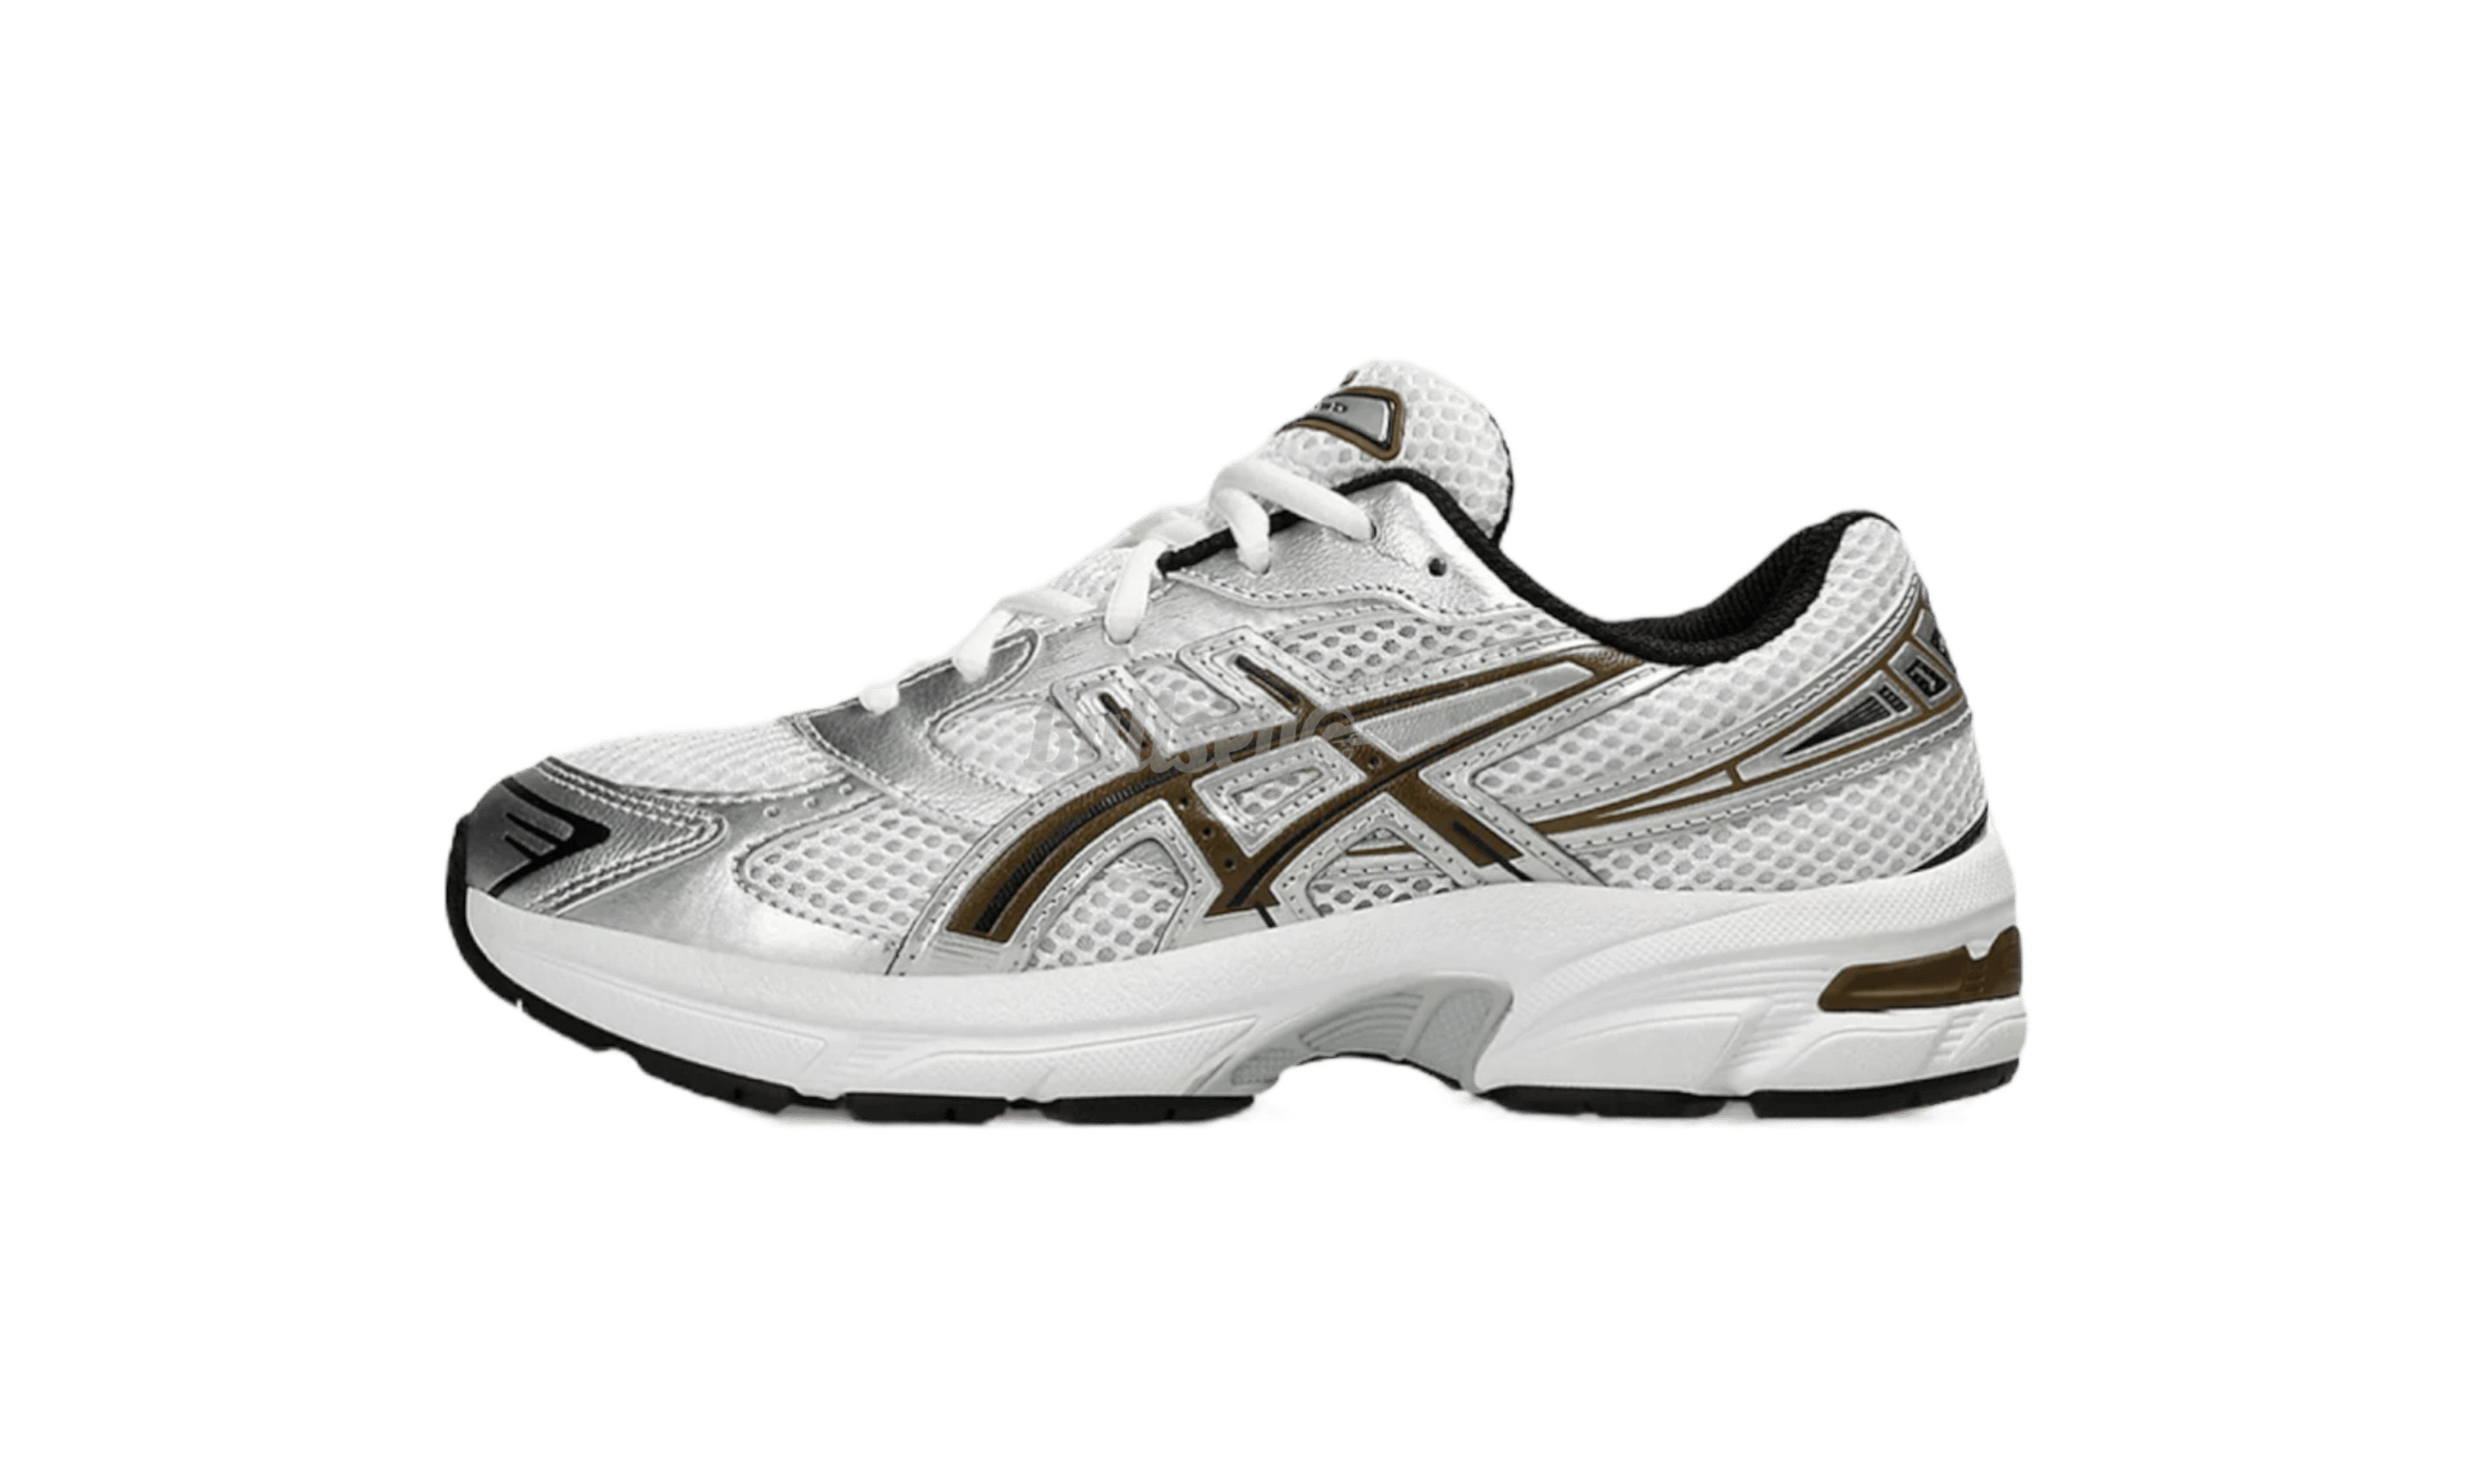 Asics Gel-1130 "White/Clay Canyon" GS